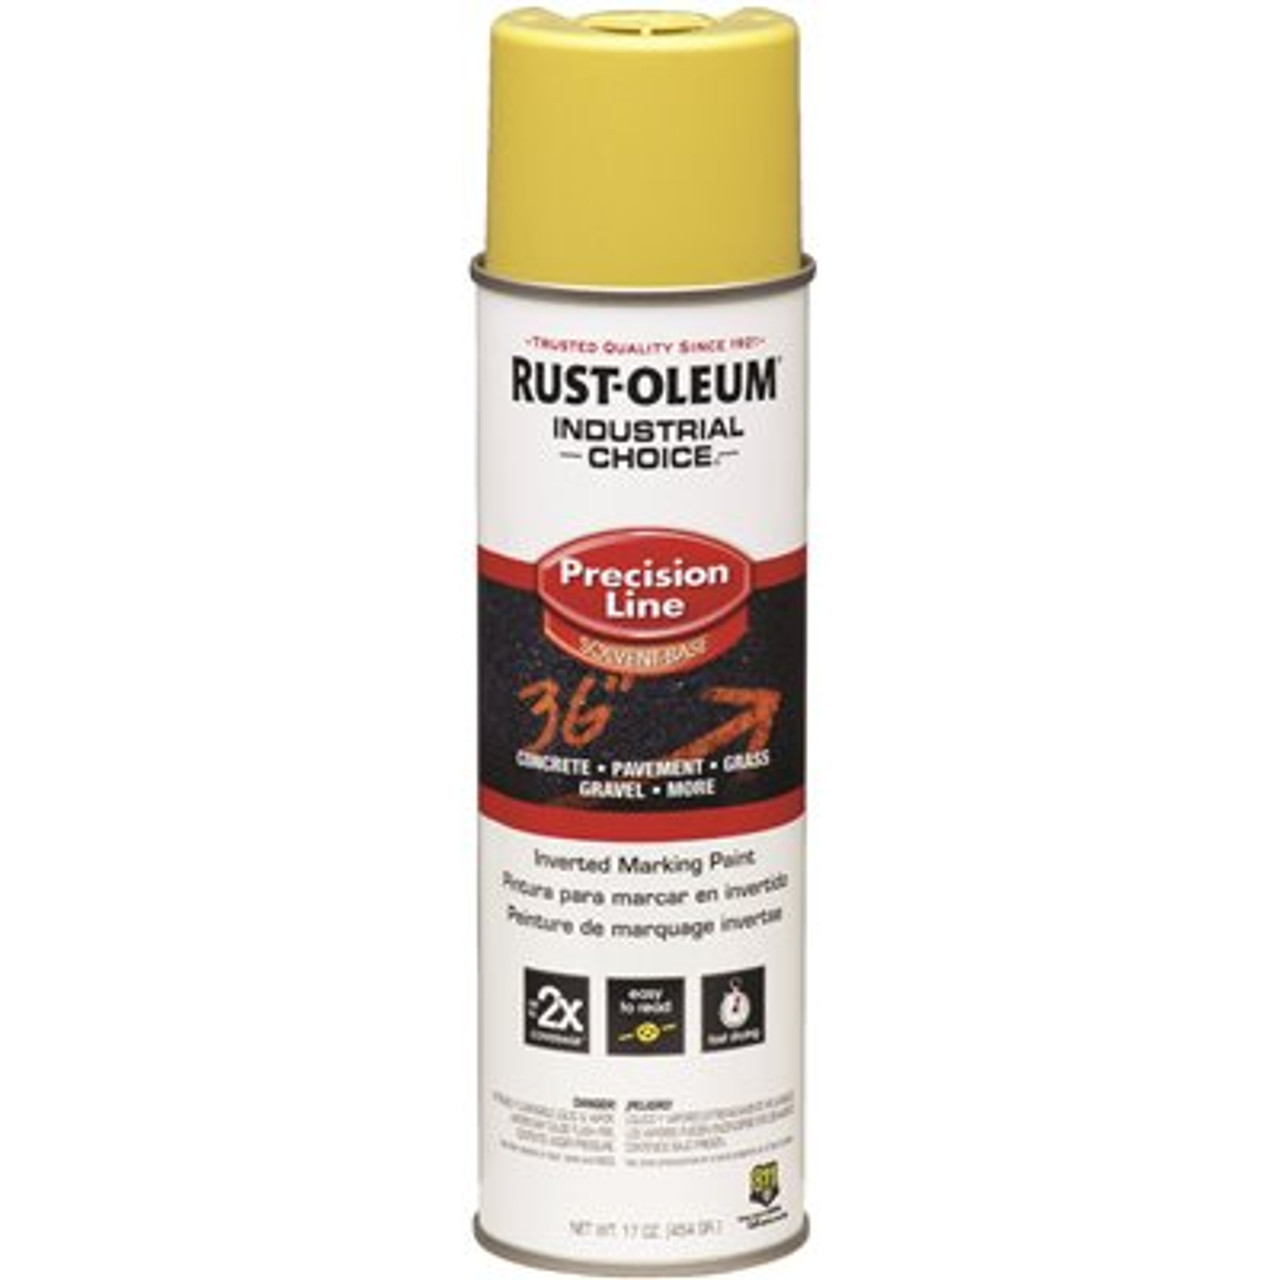 Rust-Oleum Industrial Choice 17 oz. M1600 Flat High Visibilty Yellow Inverted Marking Spray Paint